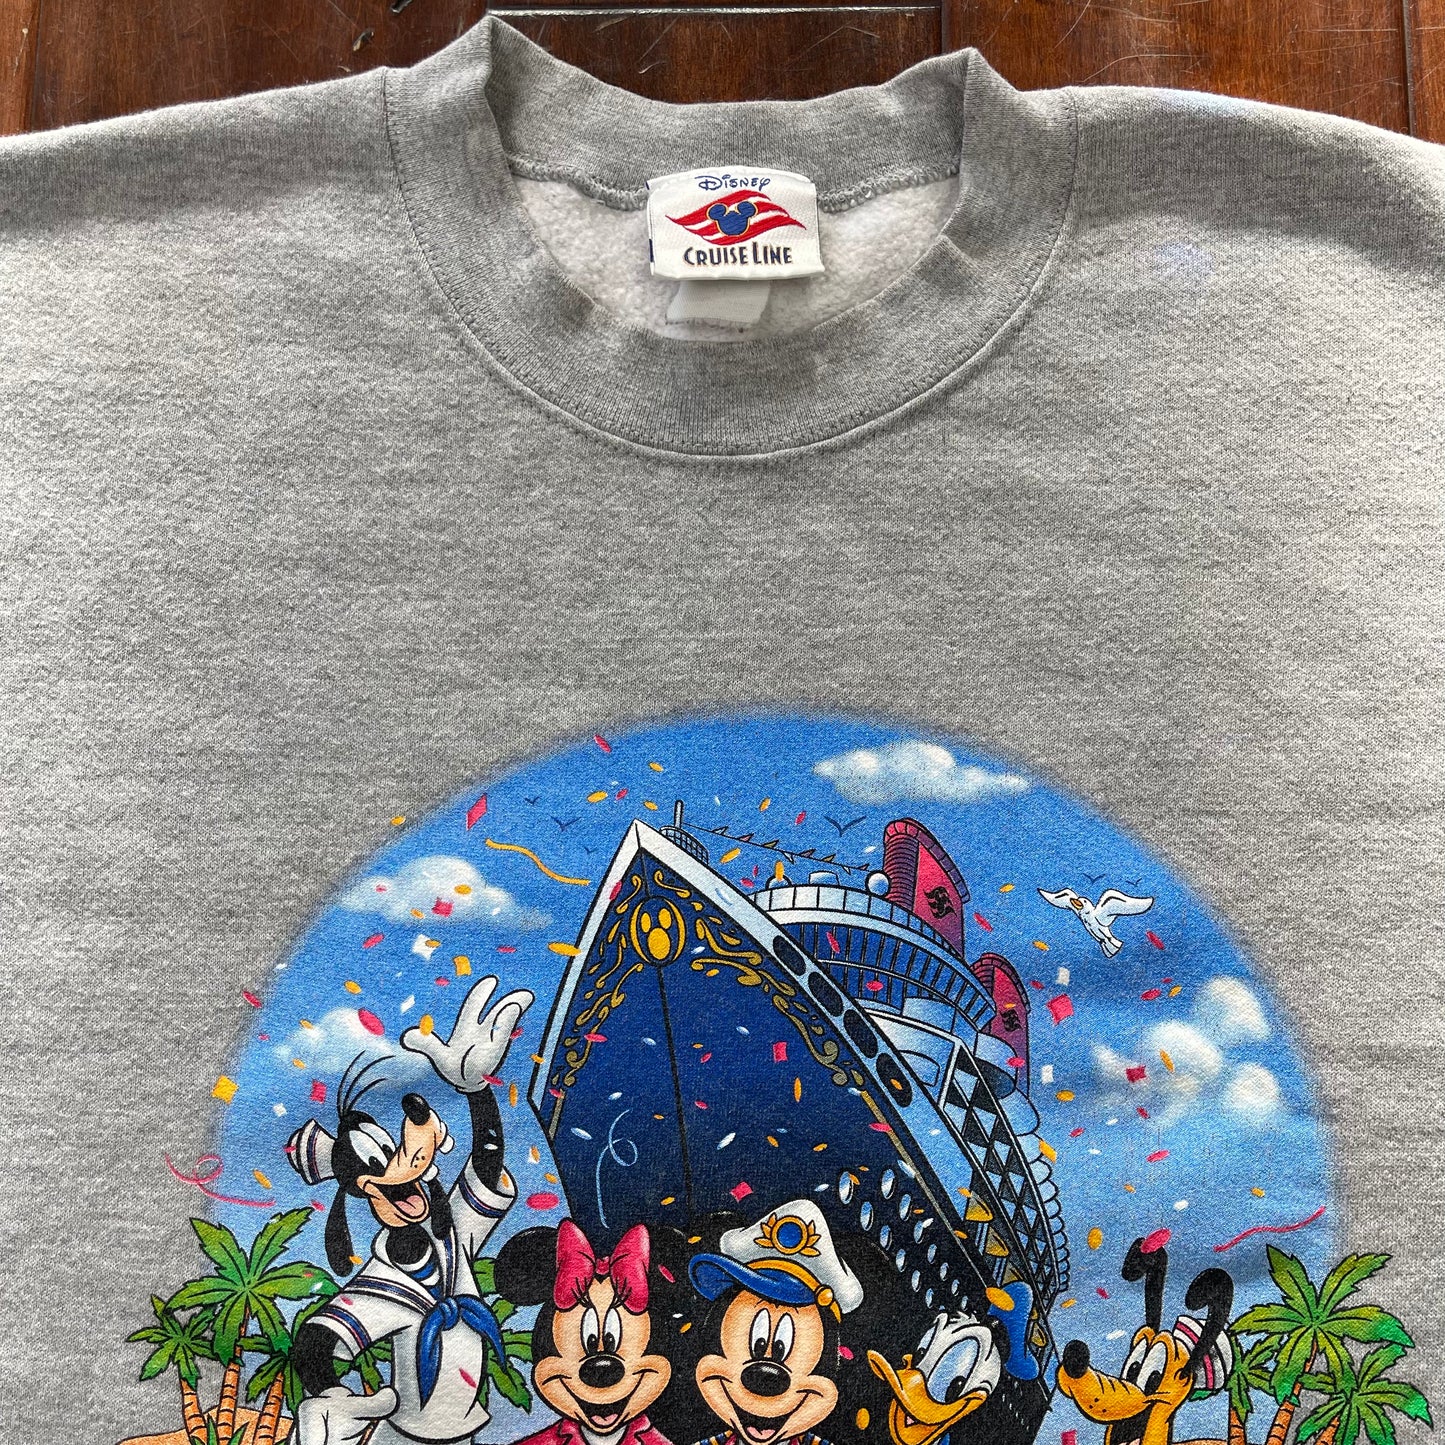 VINTAGE DISNEY CRUISE LINE CROPPED SWEATER